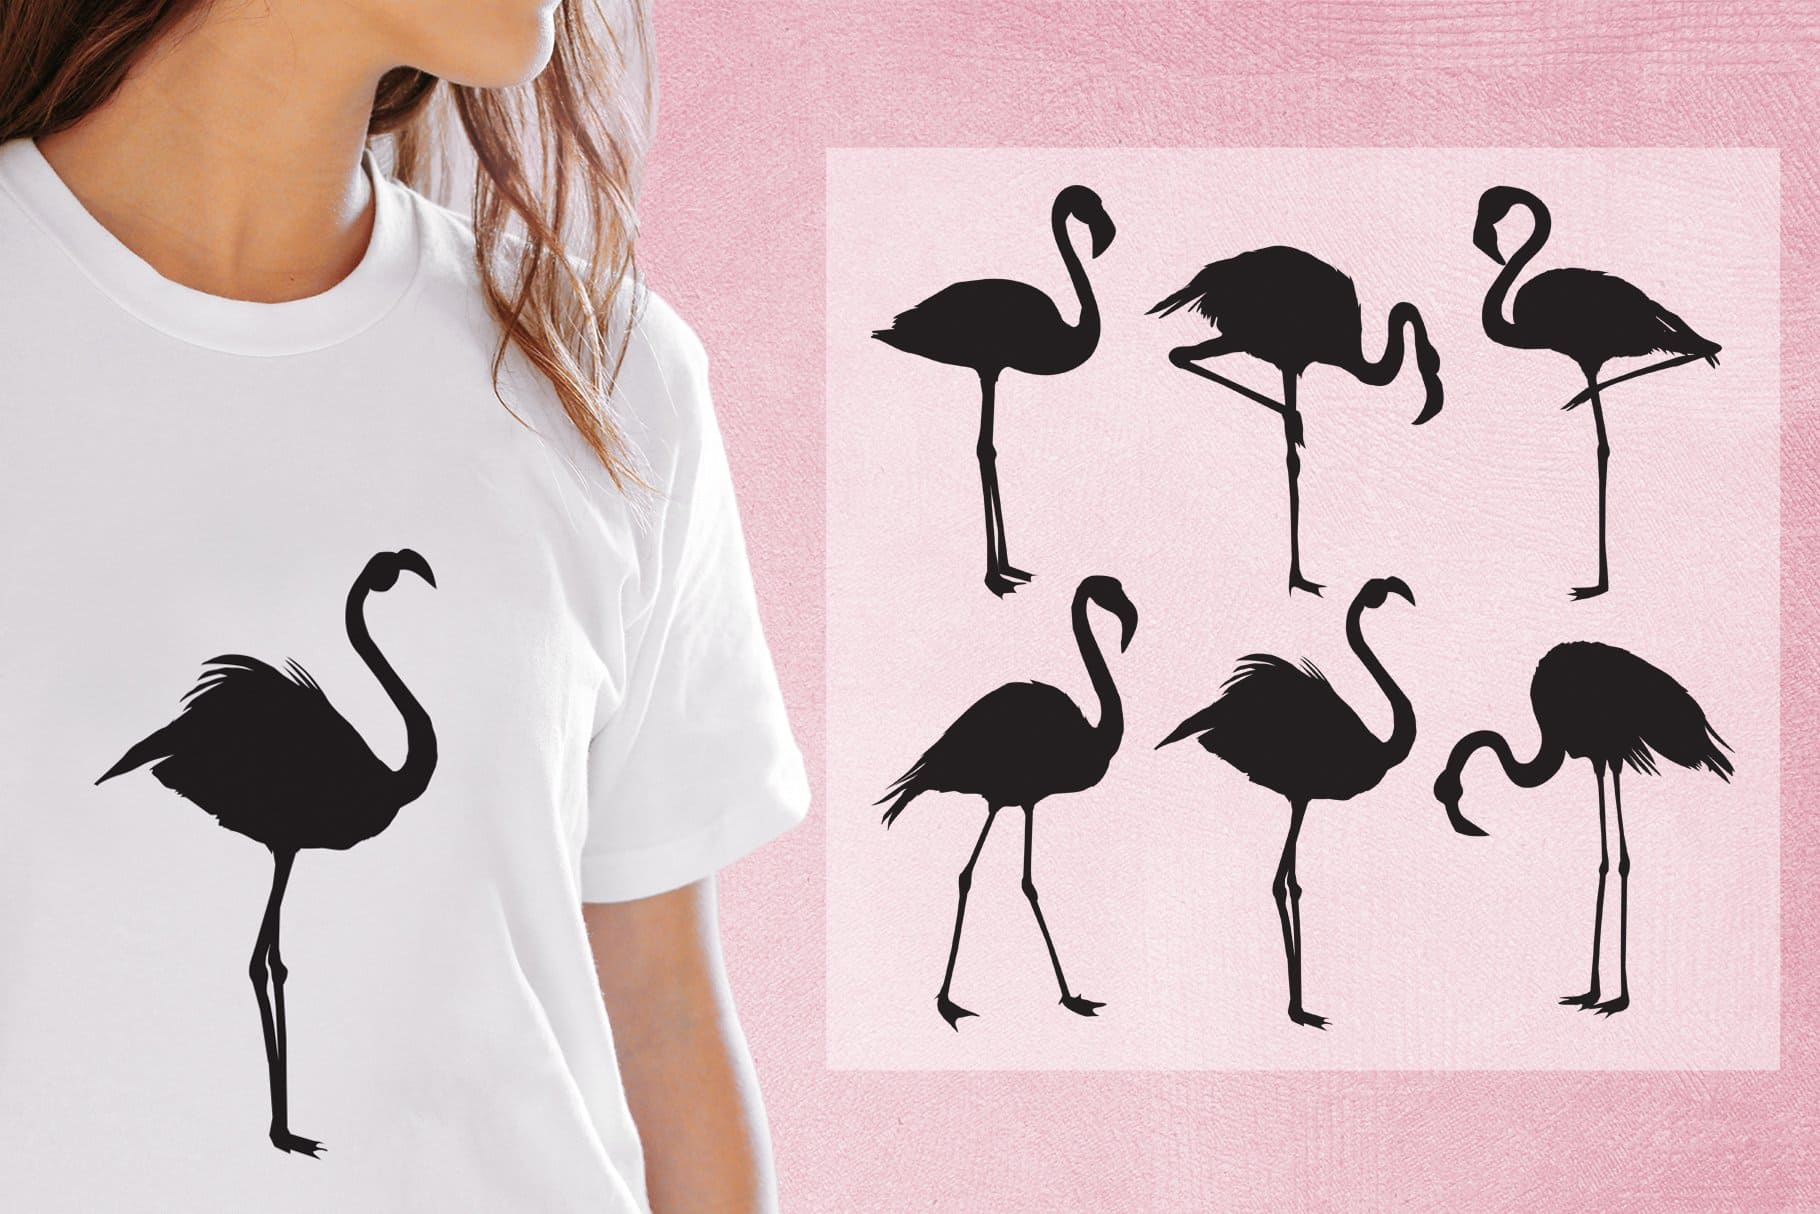 Six images of flamingo silhouettes on a light pink background.